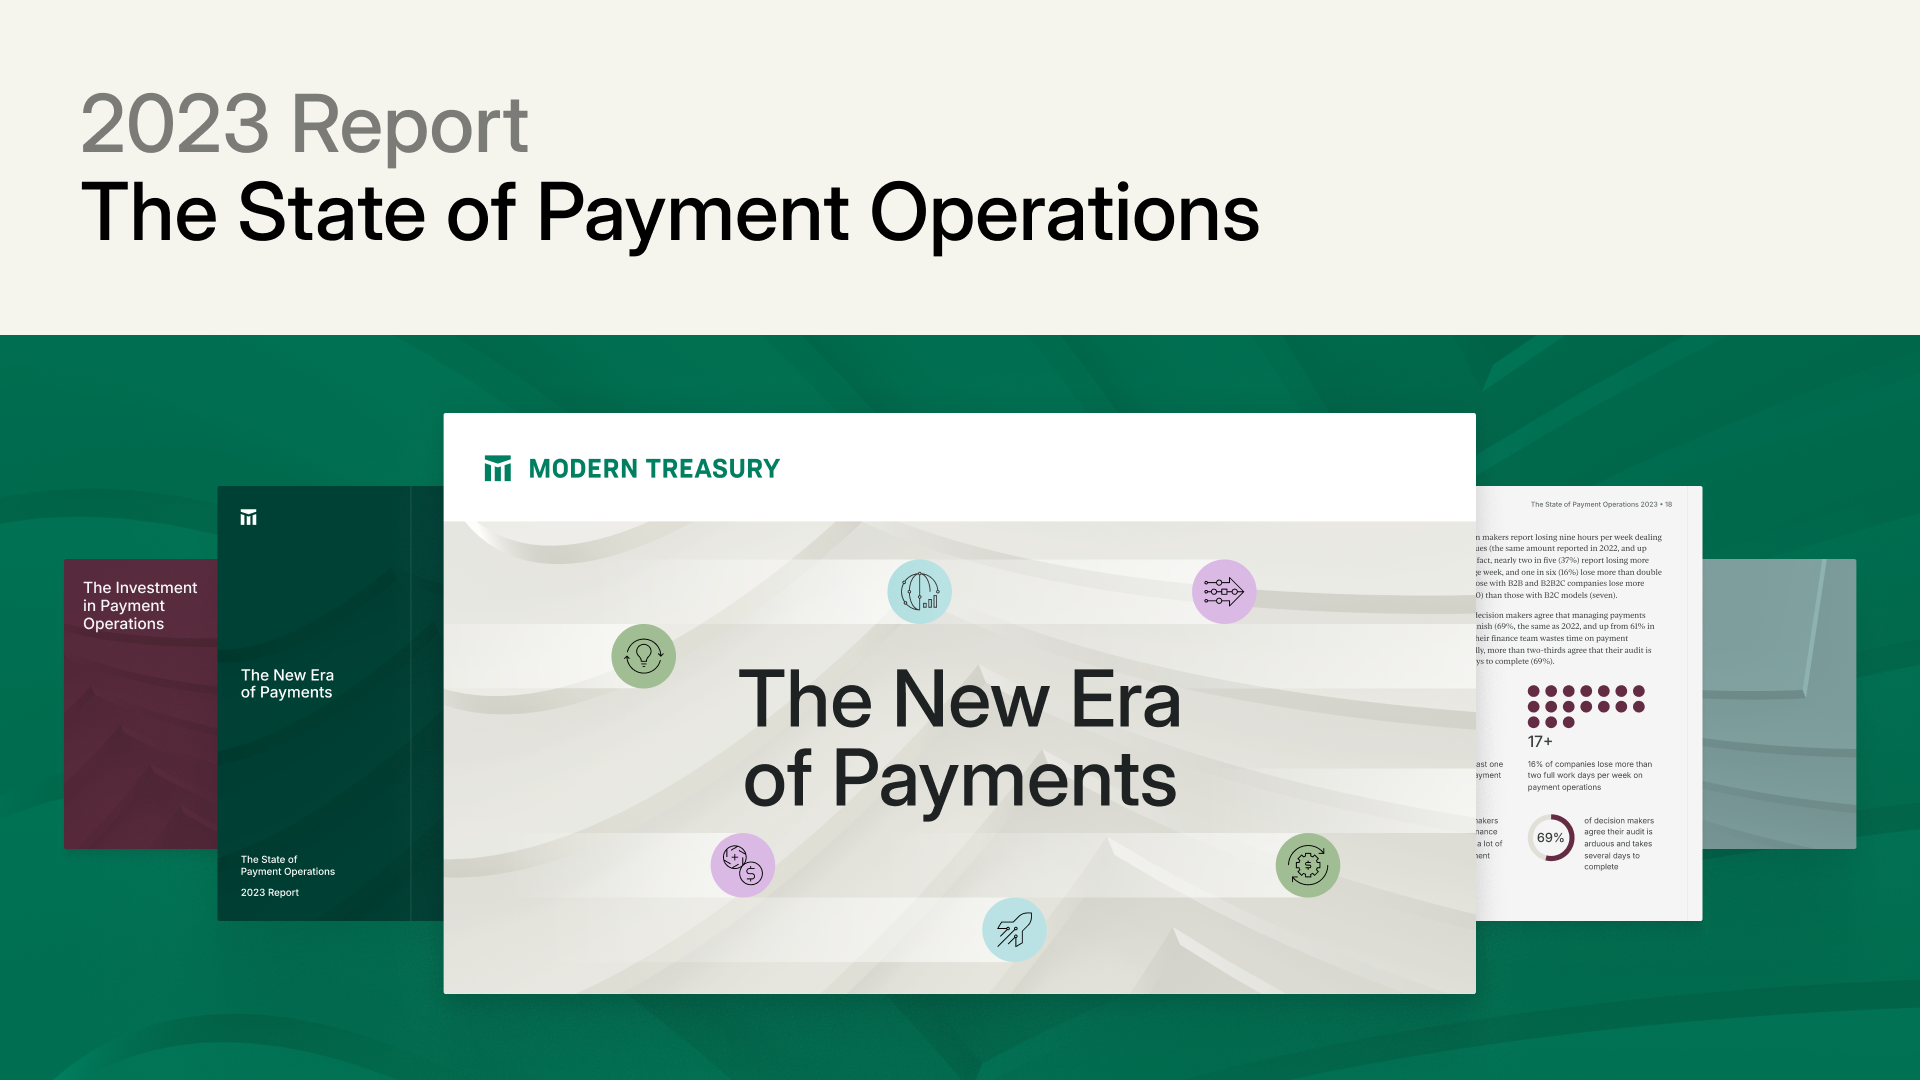 State of Payment Operations 2023